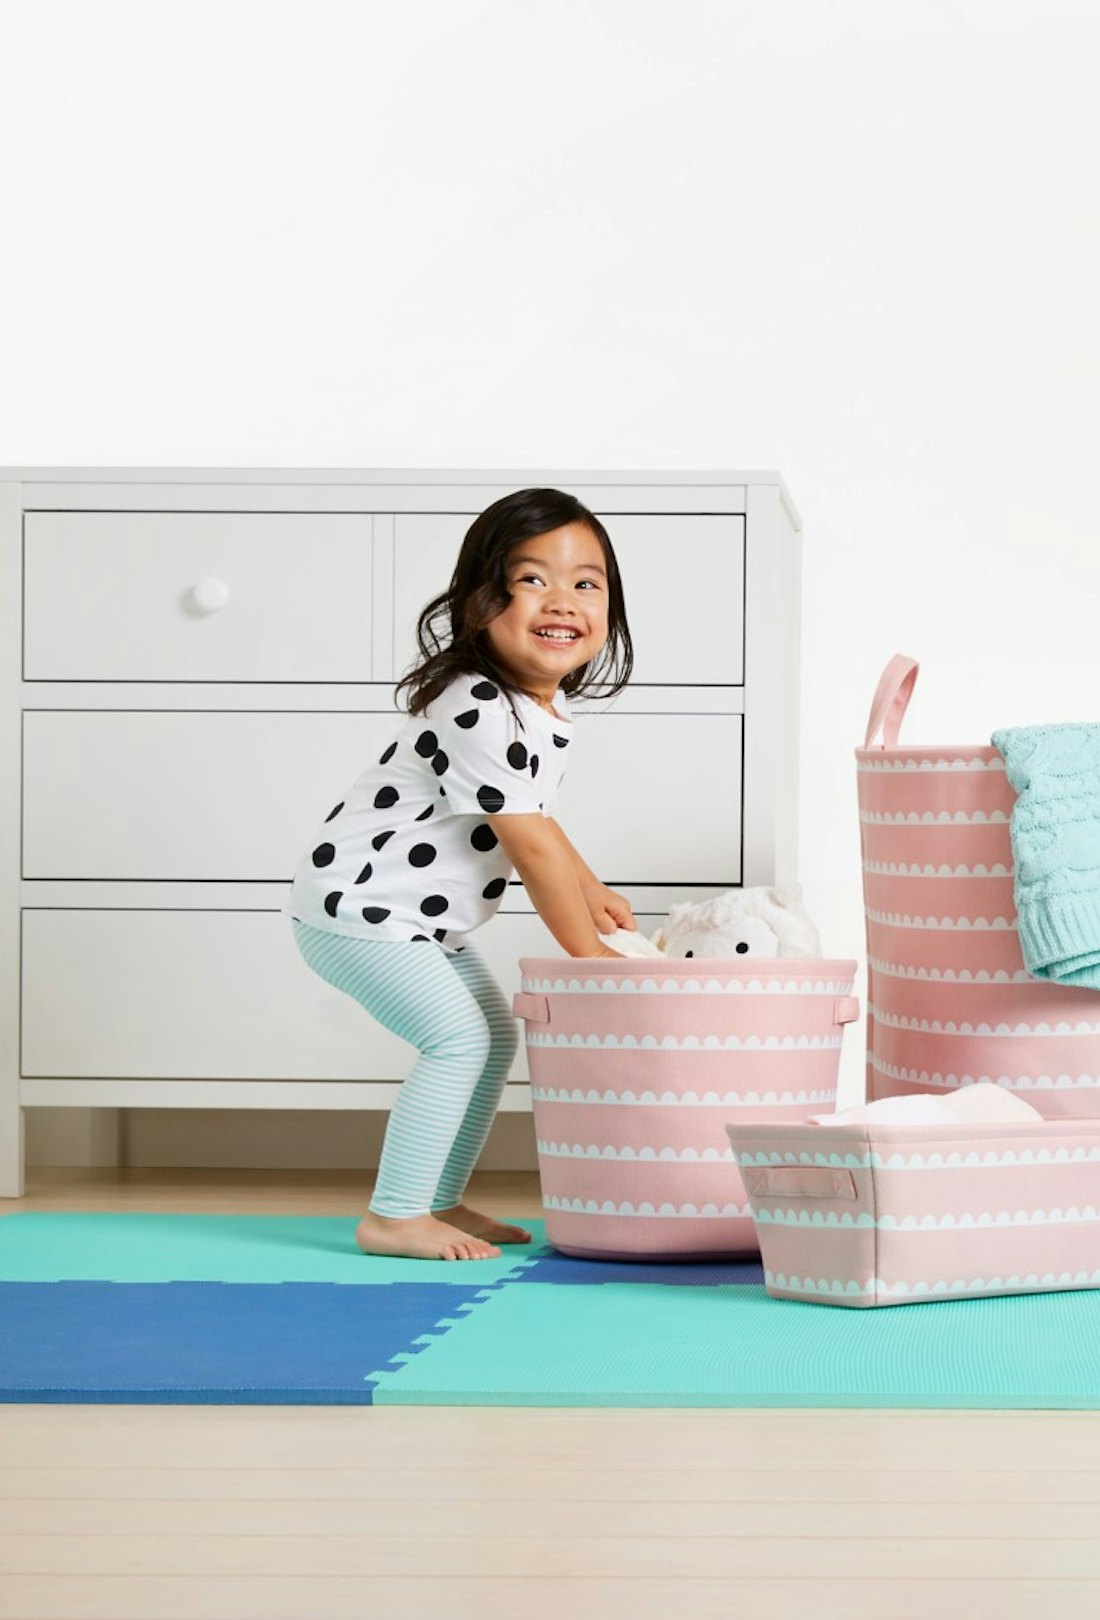 The new buybuy BABY mighty goods line has storage solutions, furniture, and clothing for babies and ...